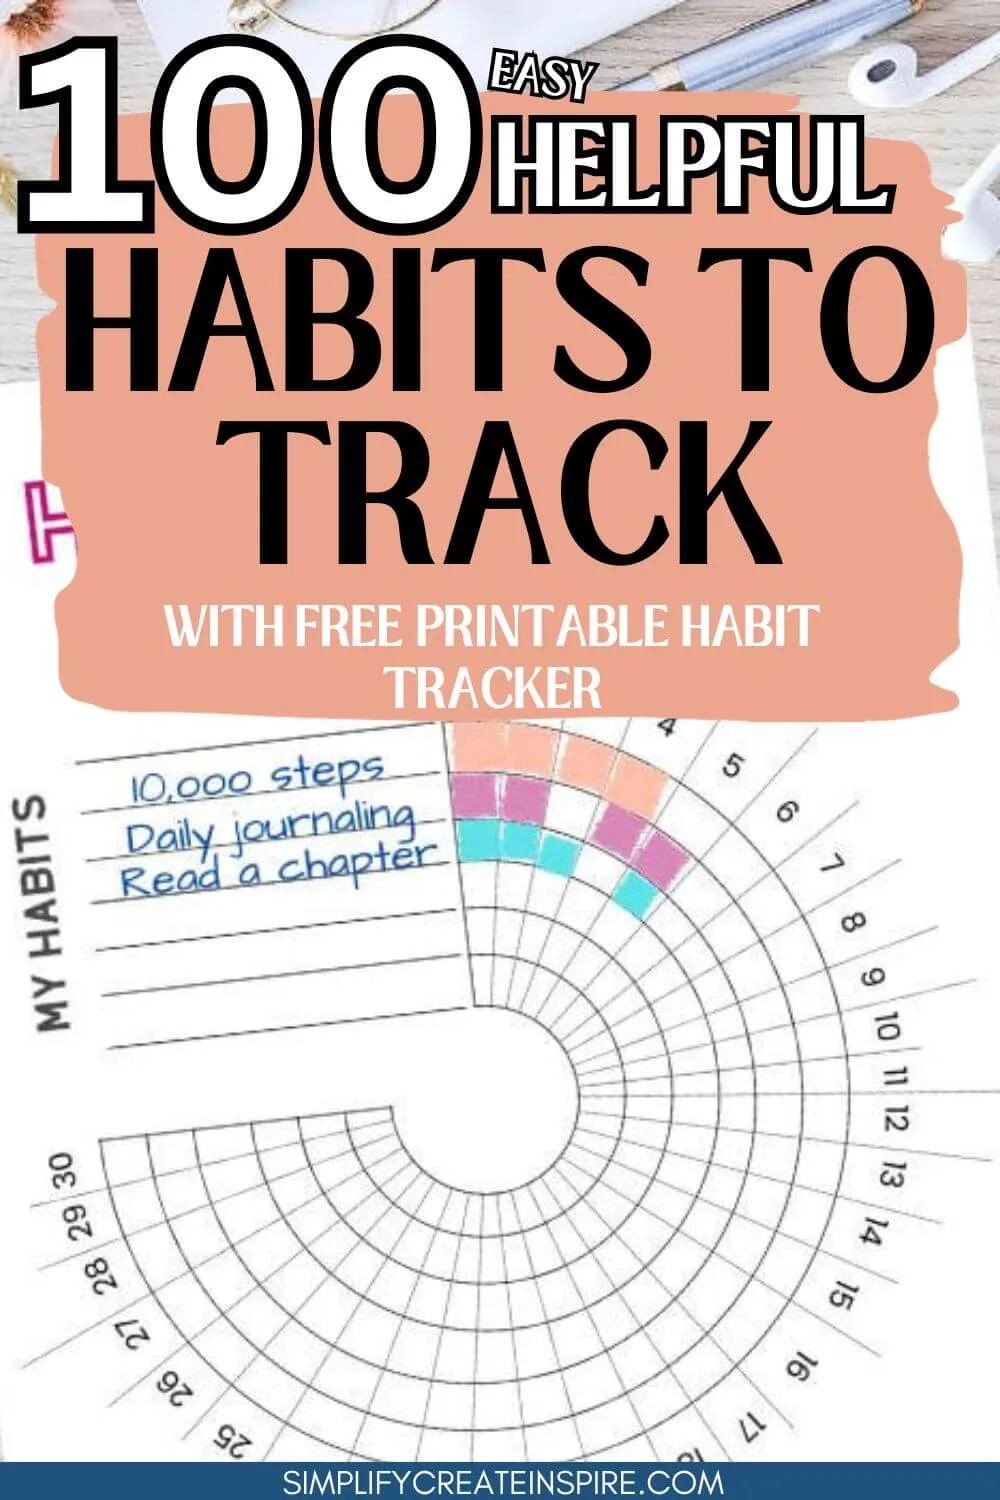 100 habits to track with a free printable habit tracker.